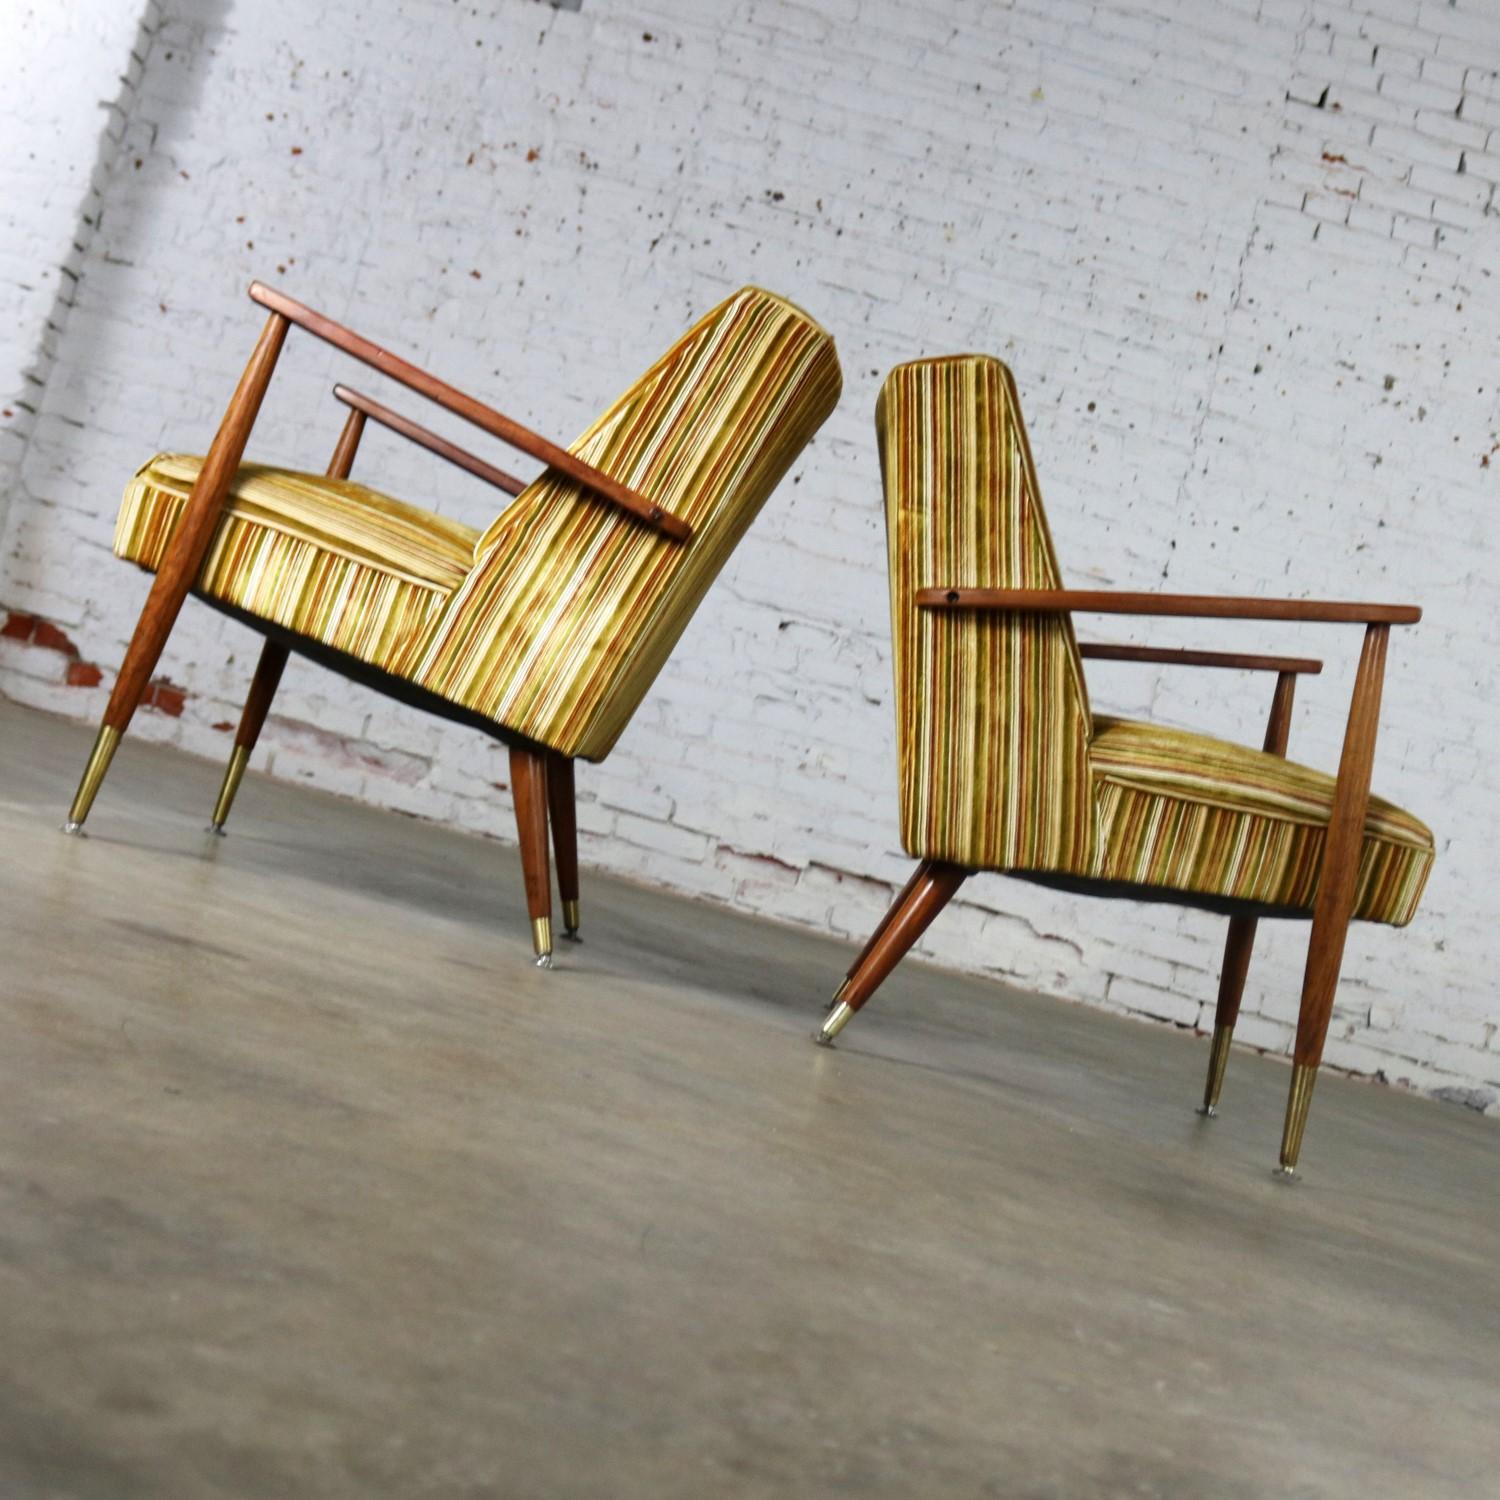 Mid-Century Modern Pair of Lounge Chairs with Teak Arms and Legs & Brass Sabots 1